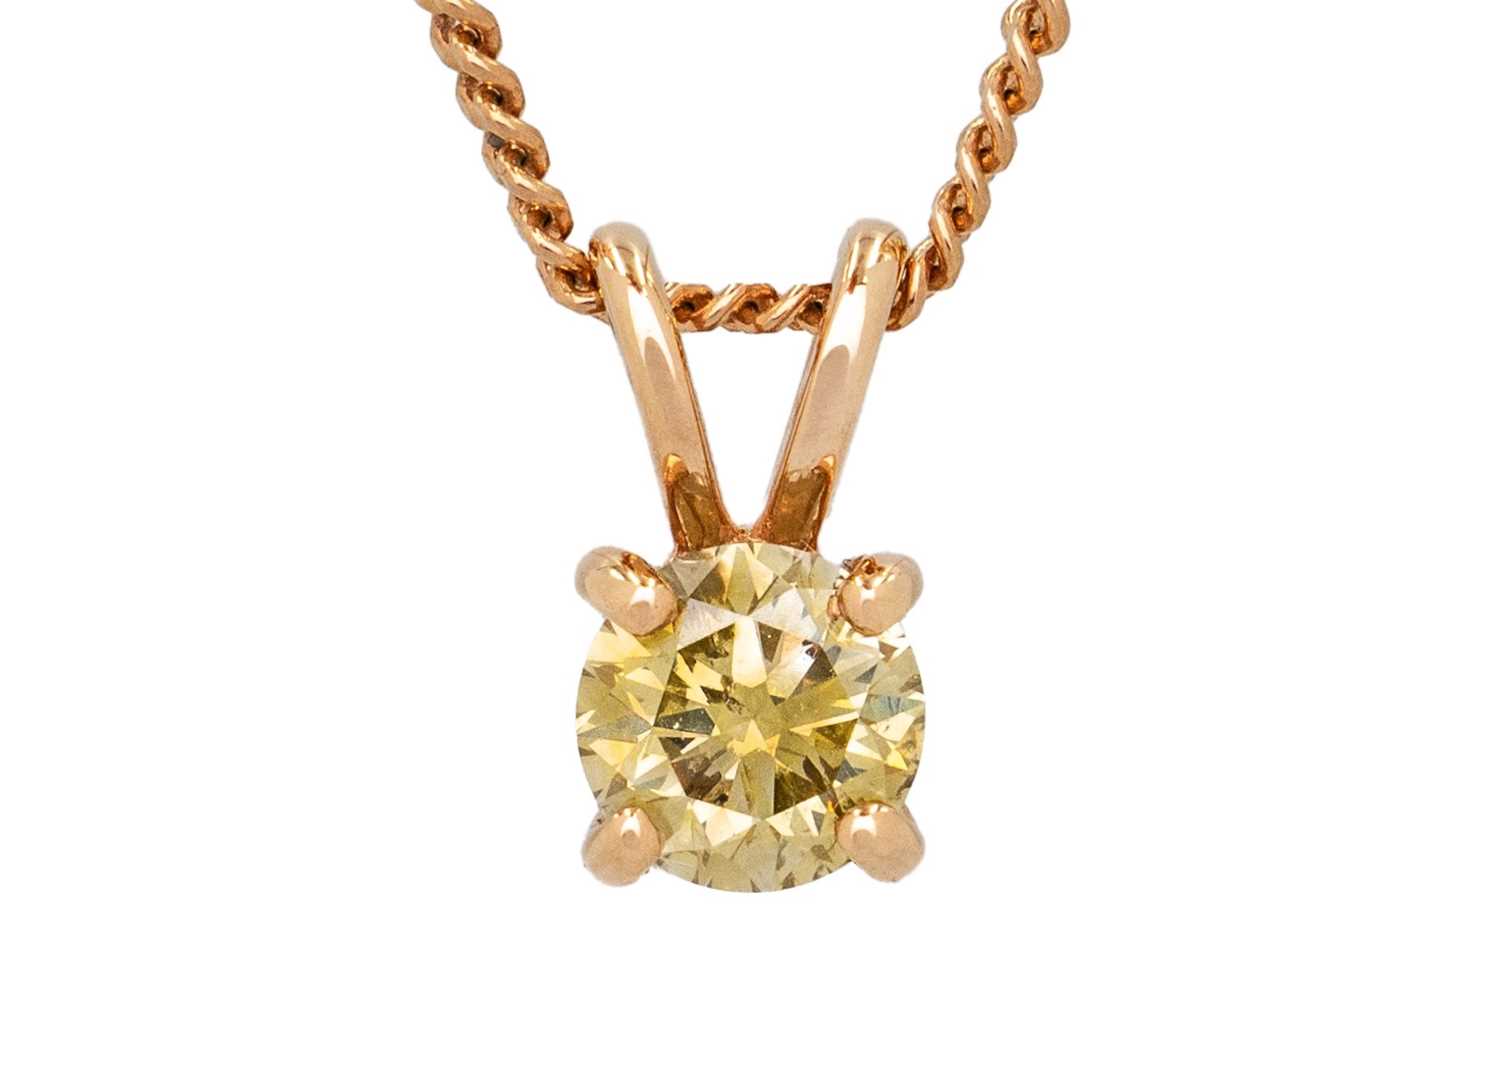 An 18ct rose gold certified 0.48ct fancy intense yellow natural diamond solitaire pendant.